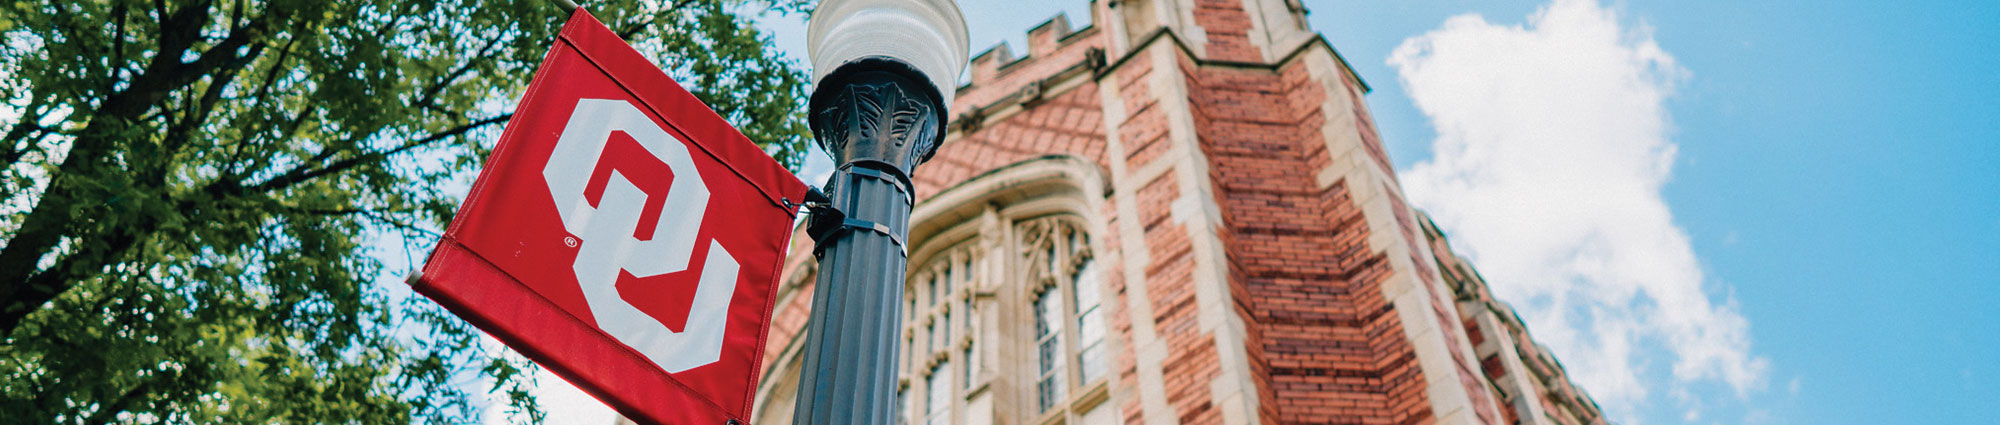 ou flag on lamp pole with brick building in the background